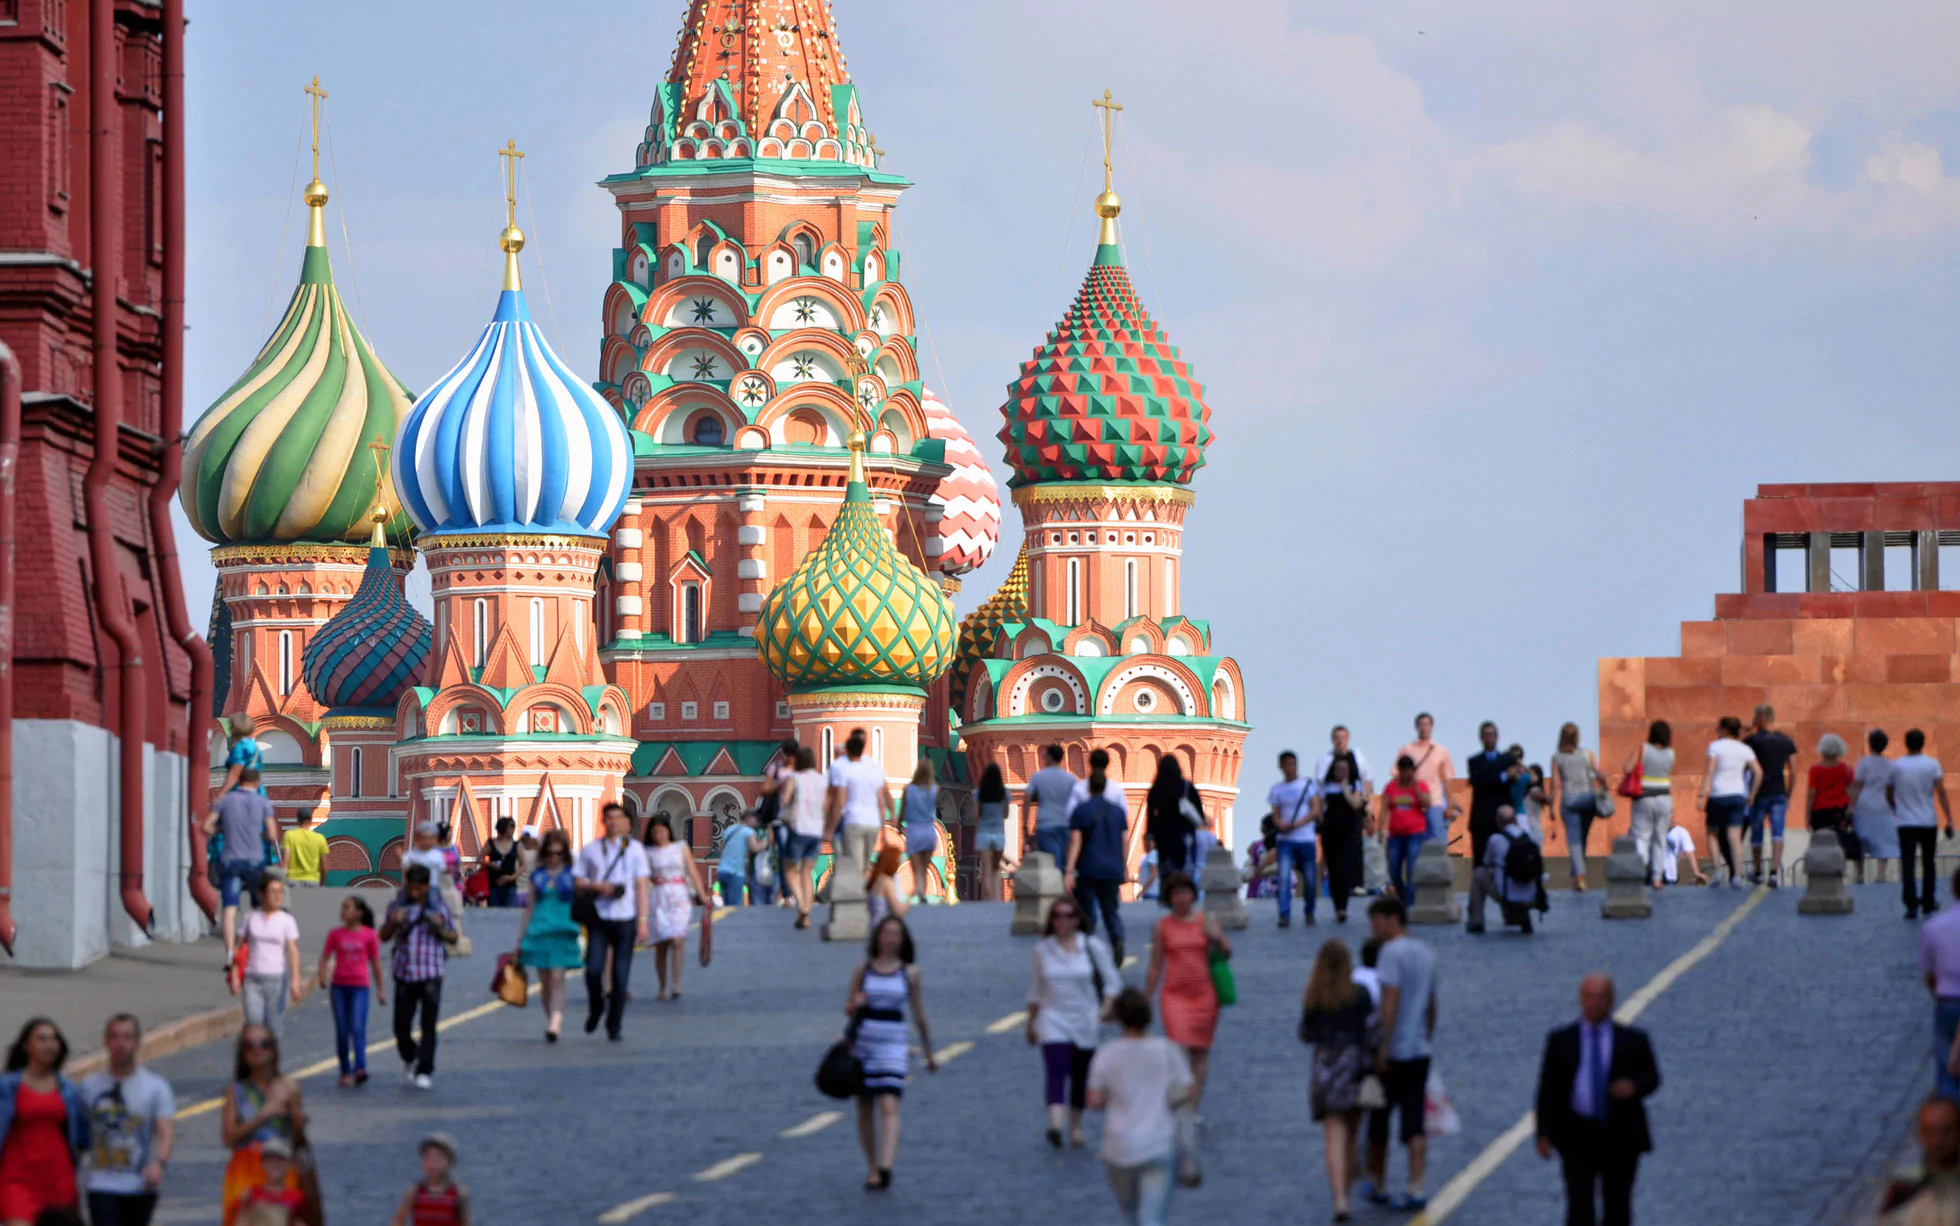 Geographic expansion of glo™ continues with launch in Russia